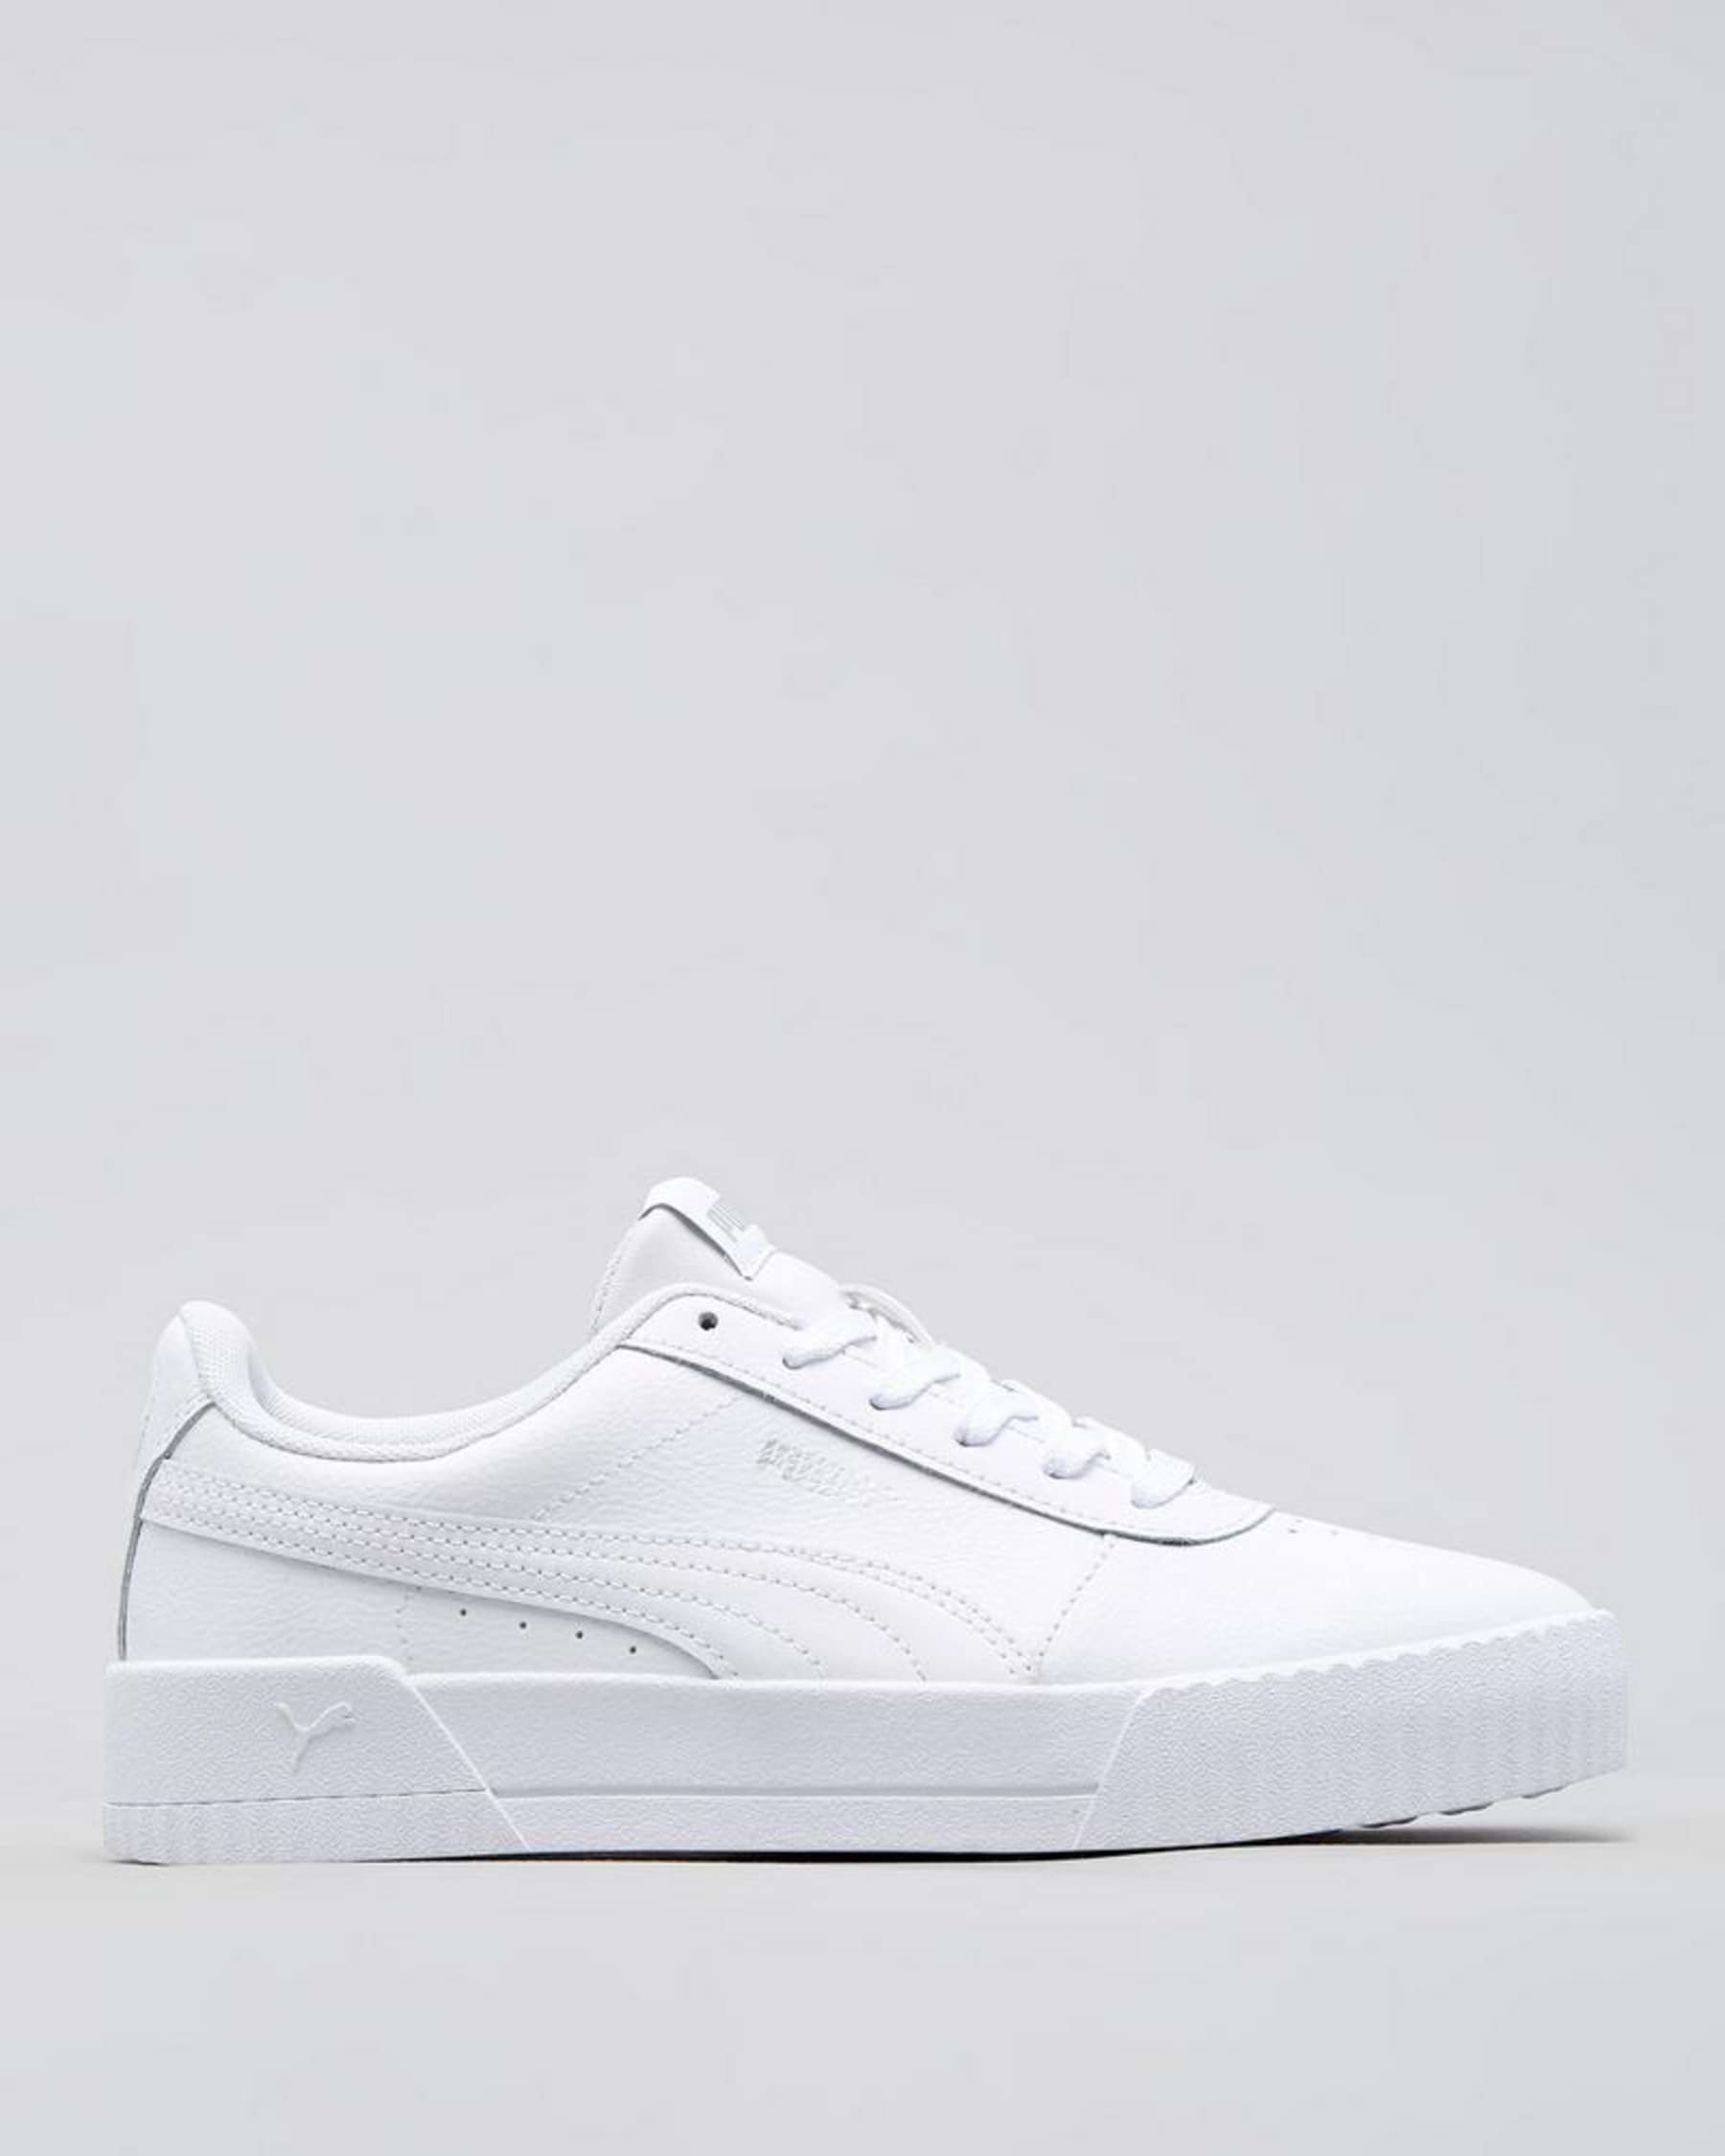 Puma Womens Carina Lift Shoes In White/white/silver - Fast Shipping ...